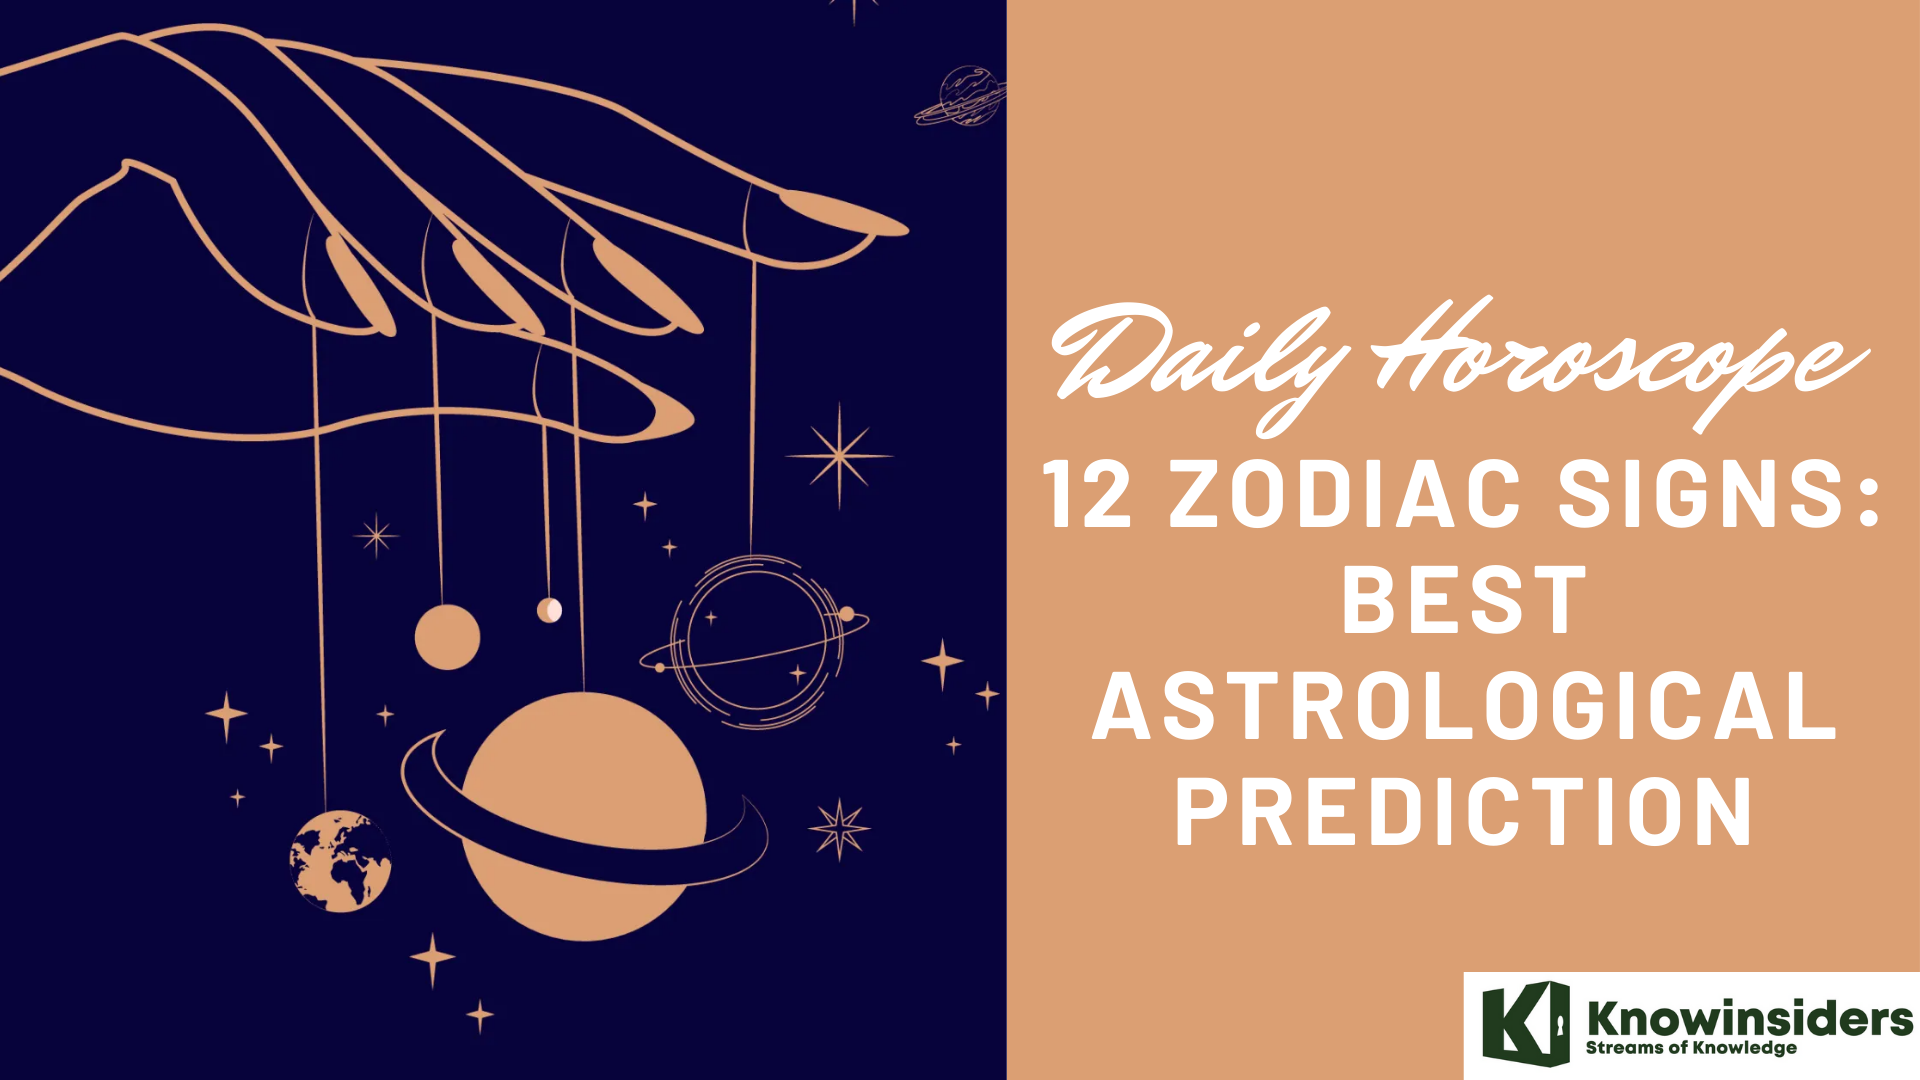 Daily Horoscope (June 3, 2022) of 12 Zodiac Signs: Best Astrological Prediction